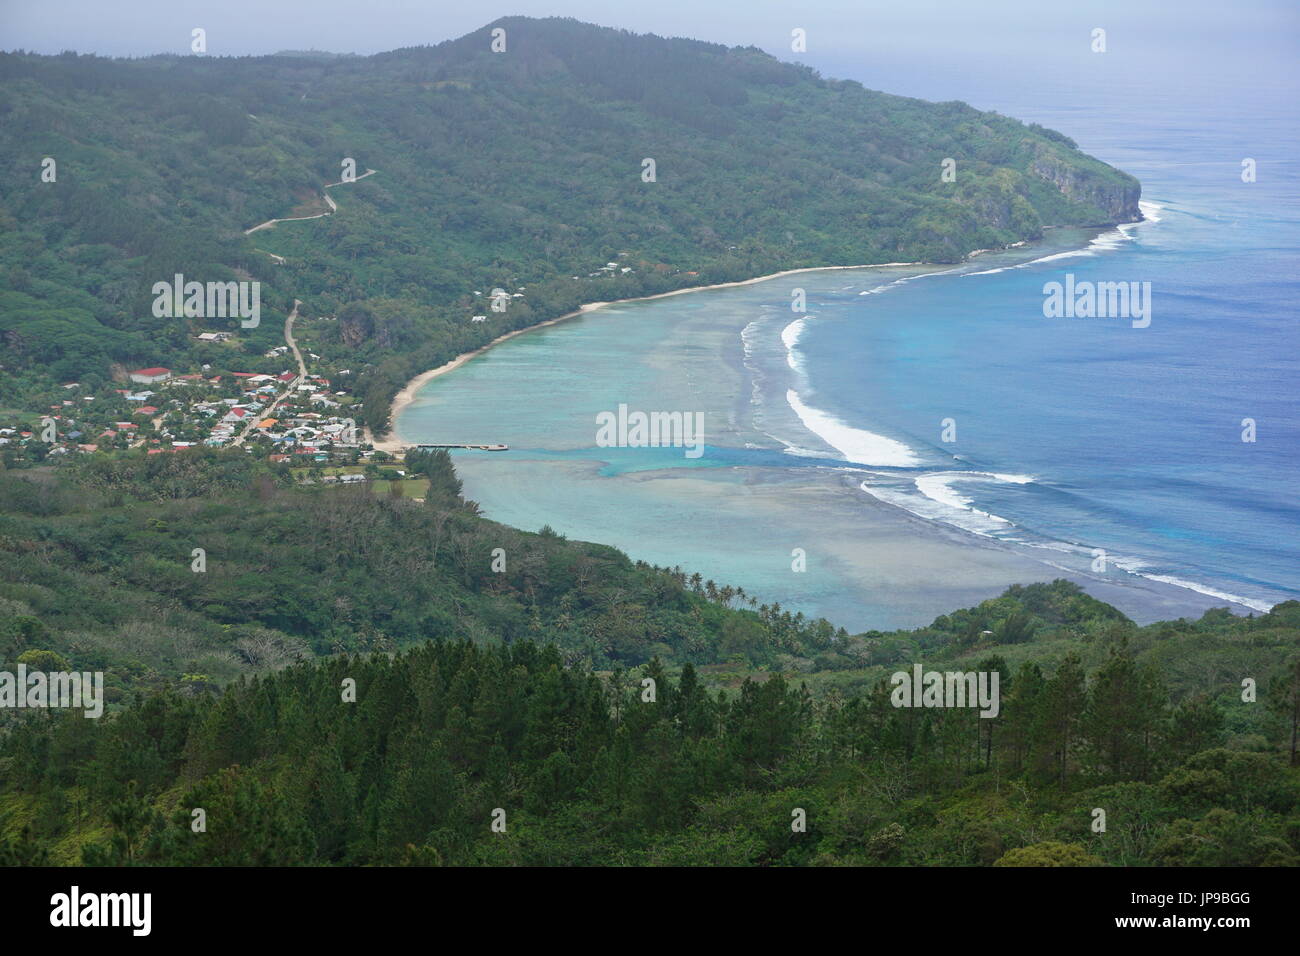 Viewpoint over the bay and the coastal village of Avera from the heights of island of Rurutu, Pacific ocean, Australes archipelago, French Polynesia Stock Photo